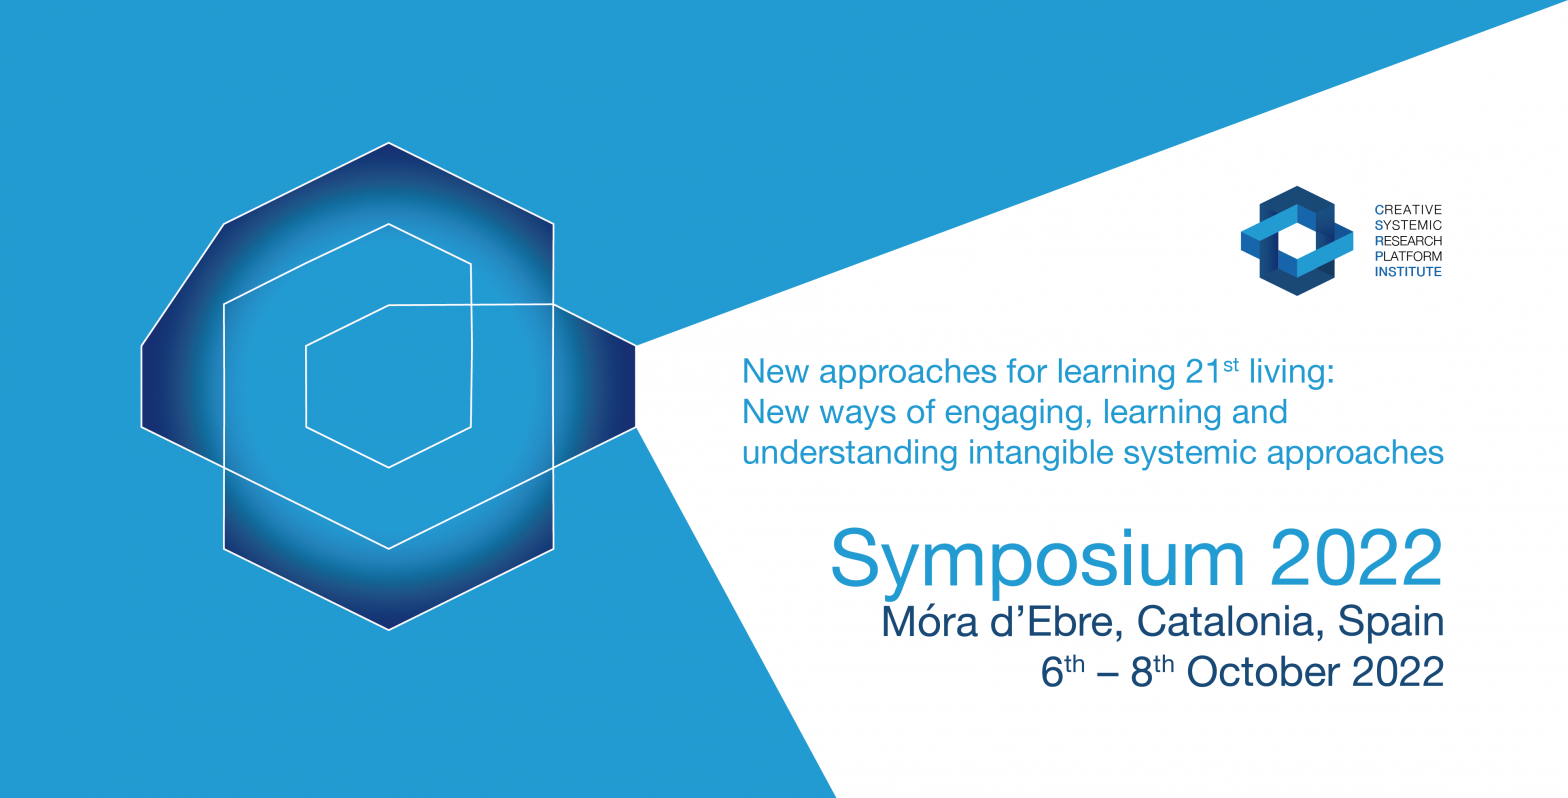 Symposium 2022 – New approaches for 21st living: New ways of engaging, learning and understanding intangible systemic approaches